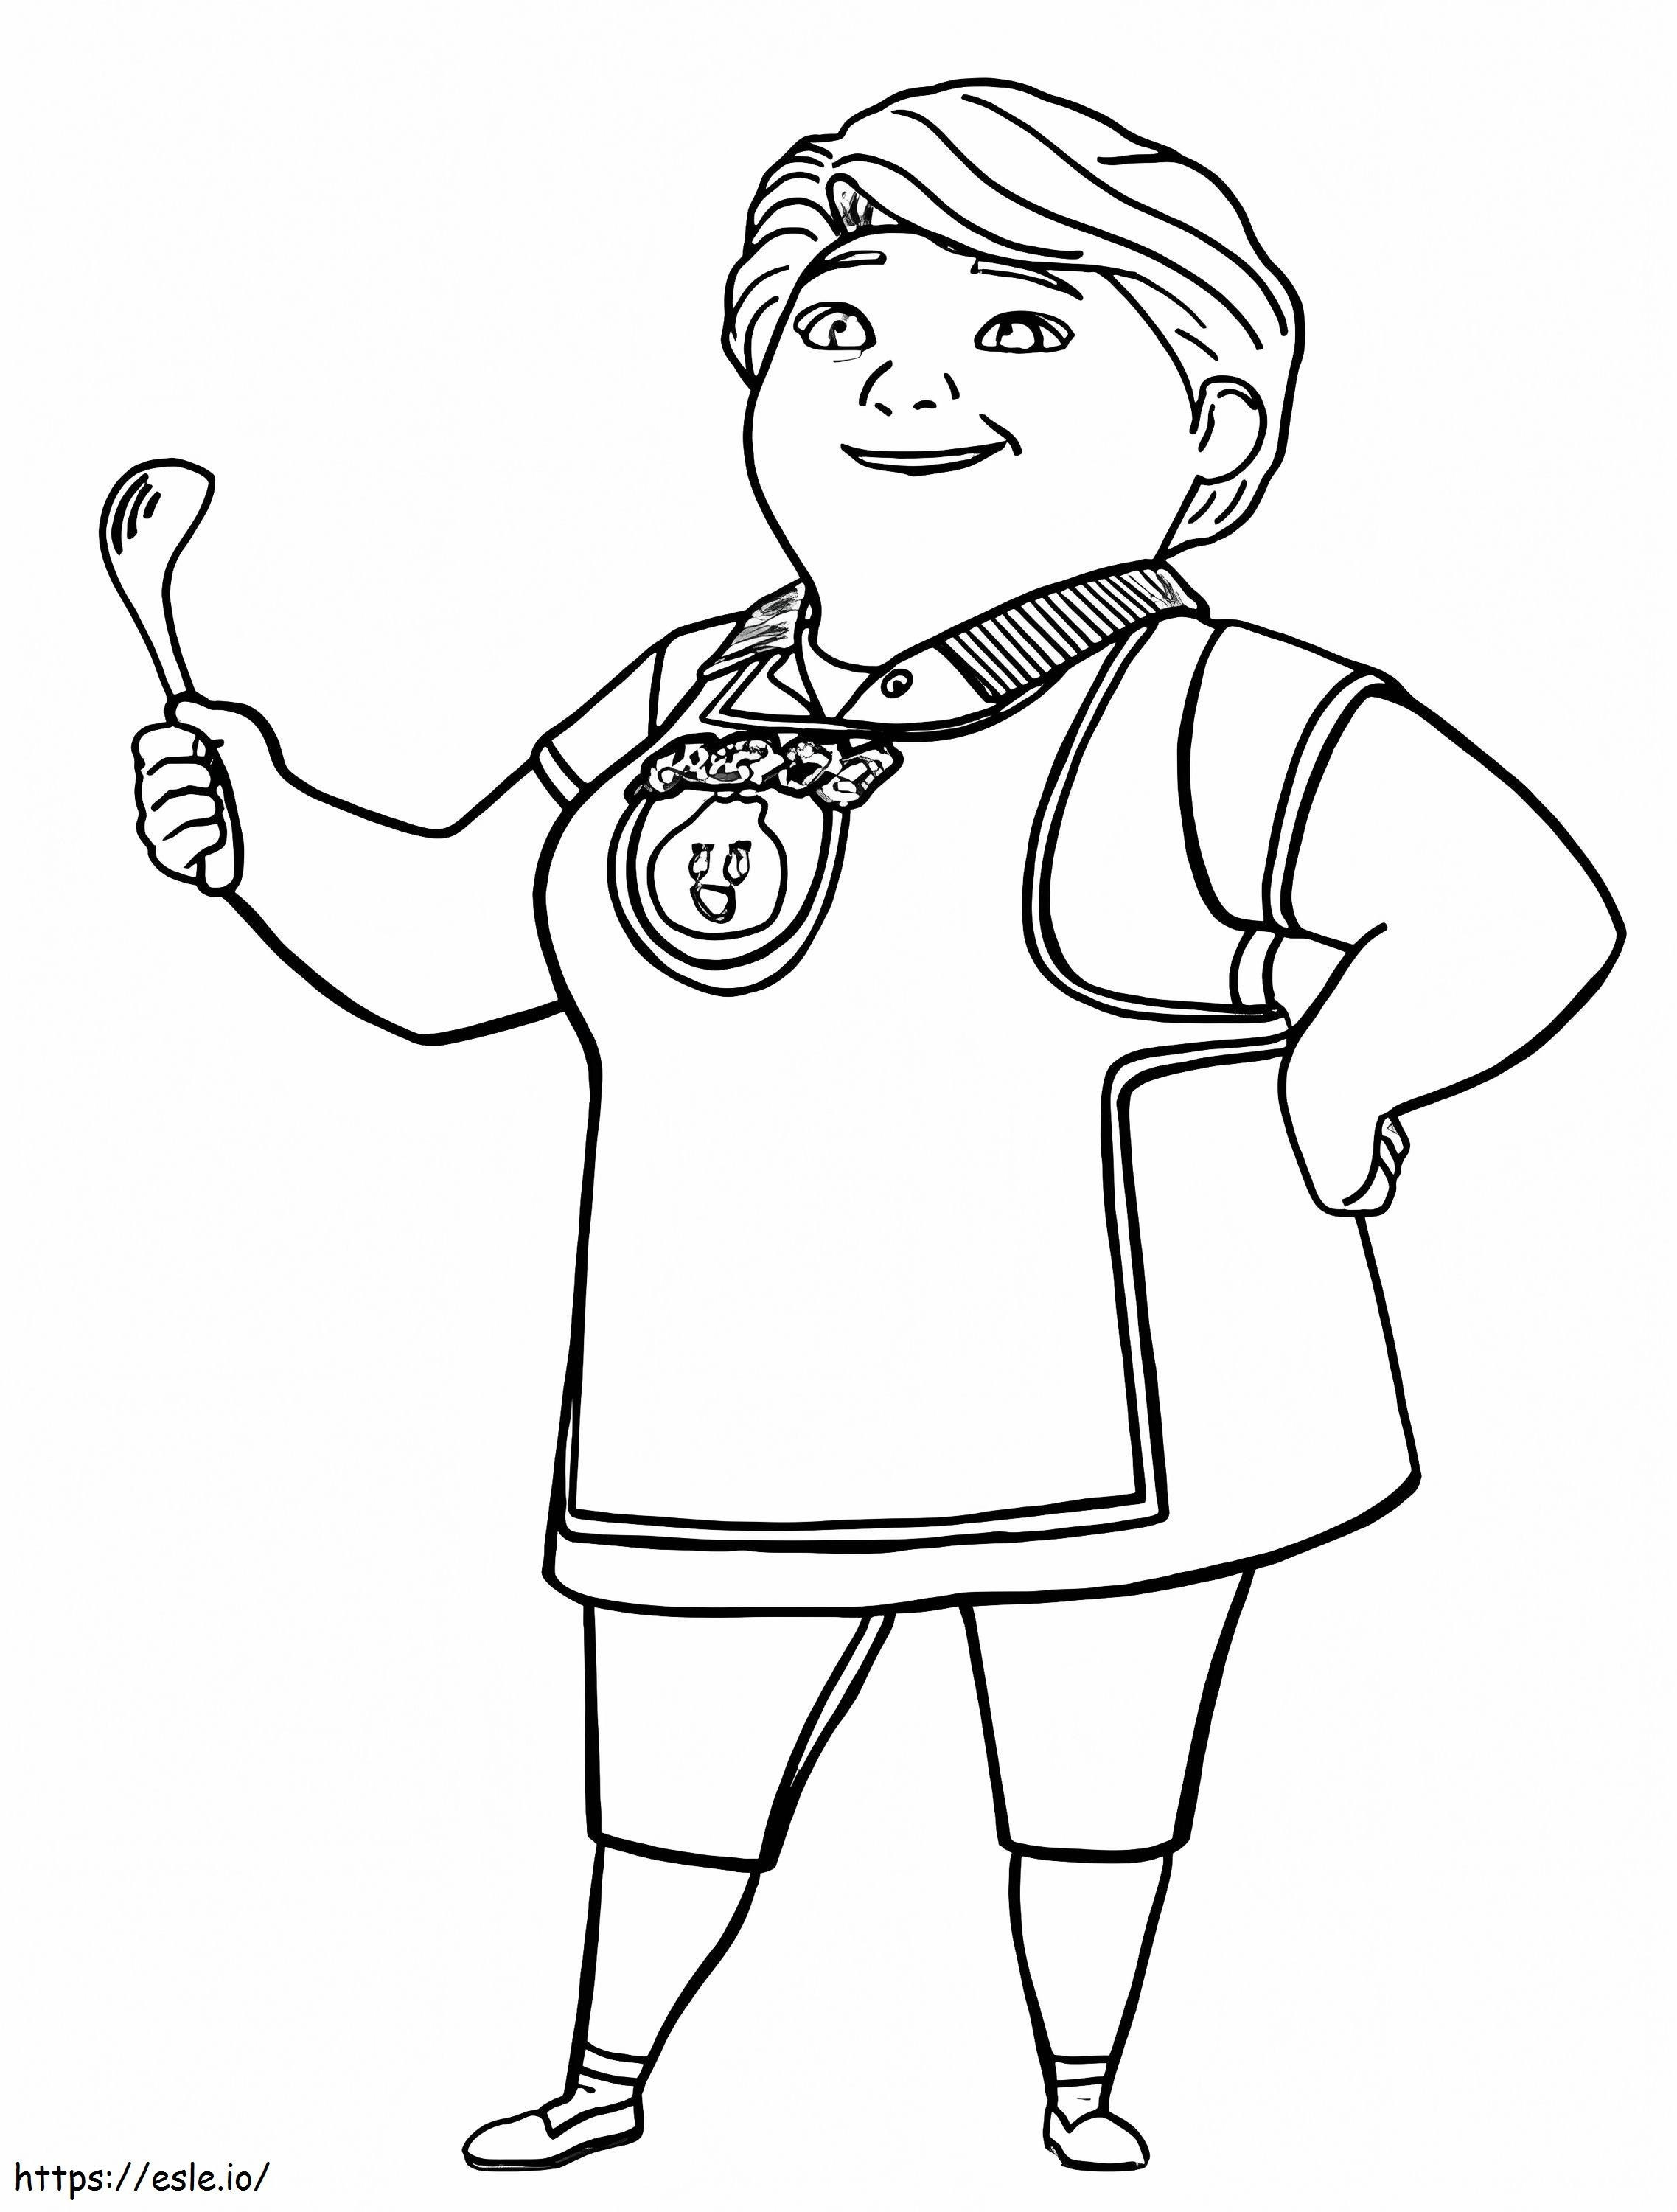 Character From Wish Dragon coloring page